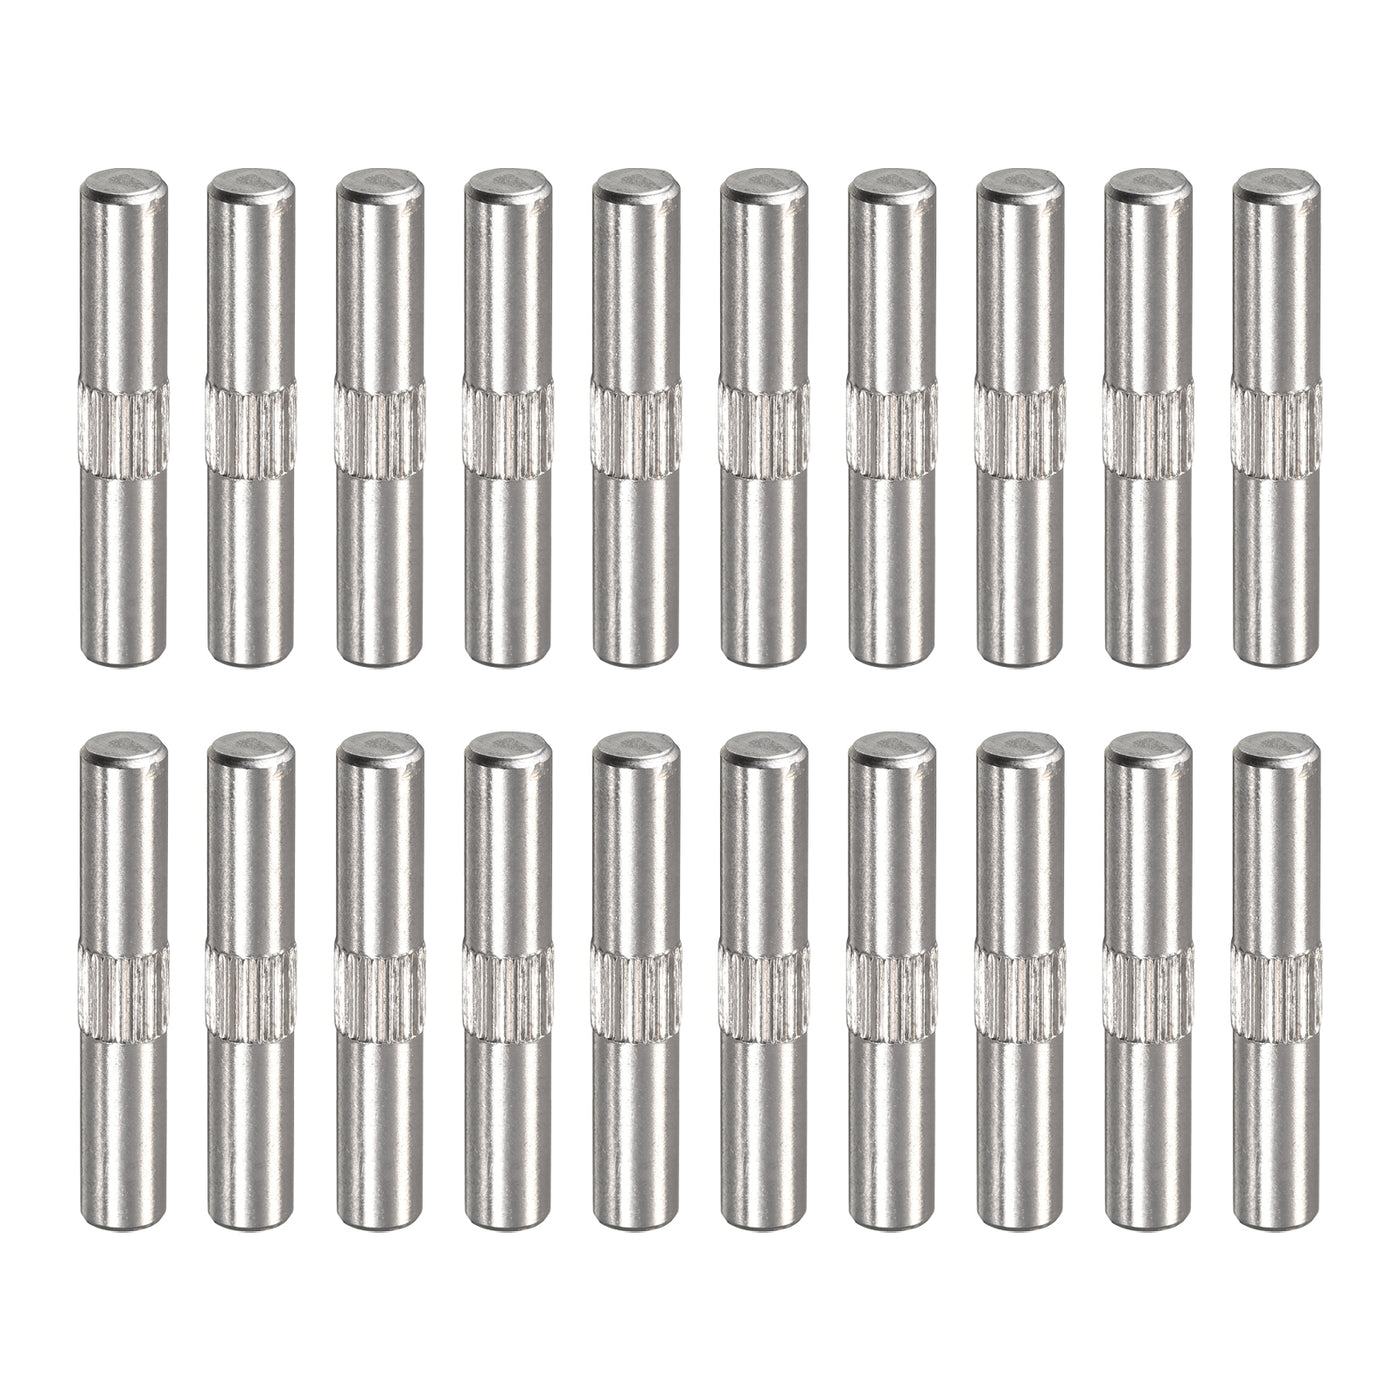 uxcell Uxcell 5x30mm 304 Stainless Steel Dowel Pins, 20Pcs Center Knurled Chamfered End Pin